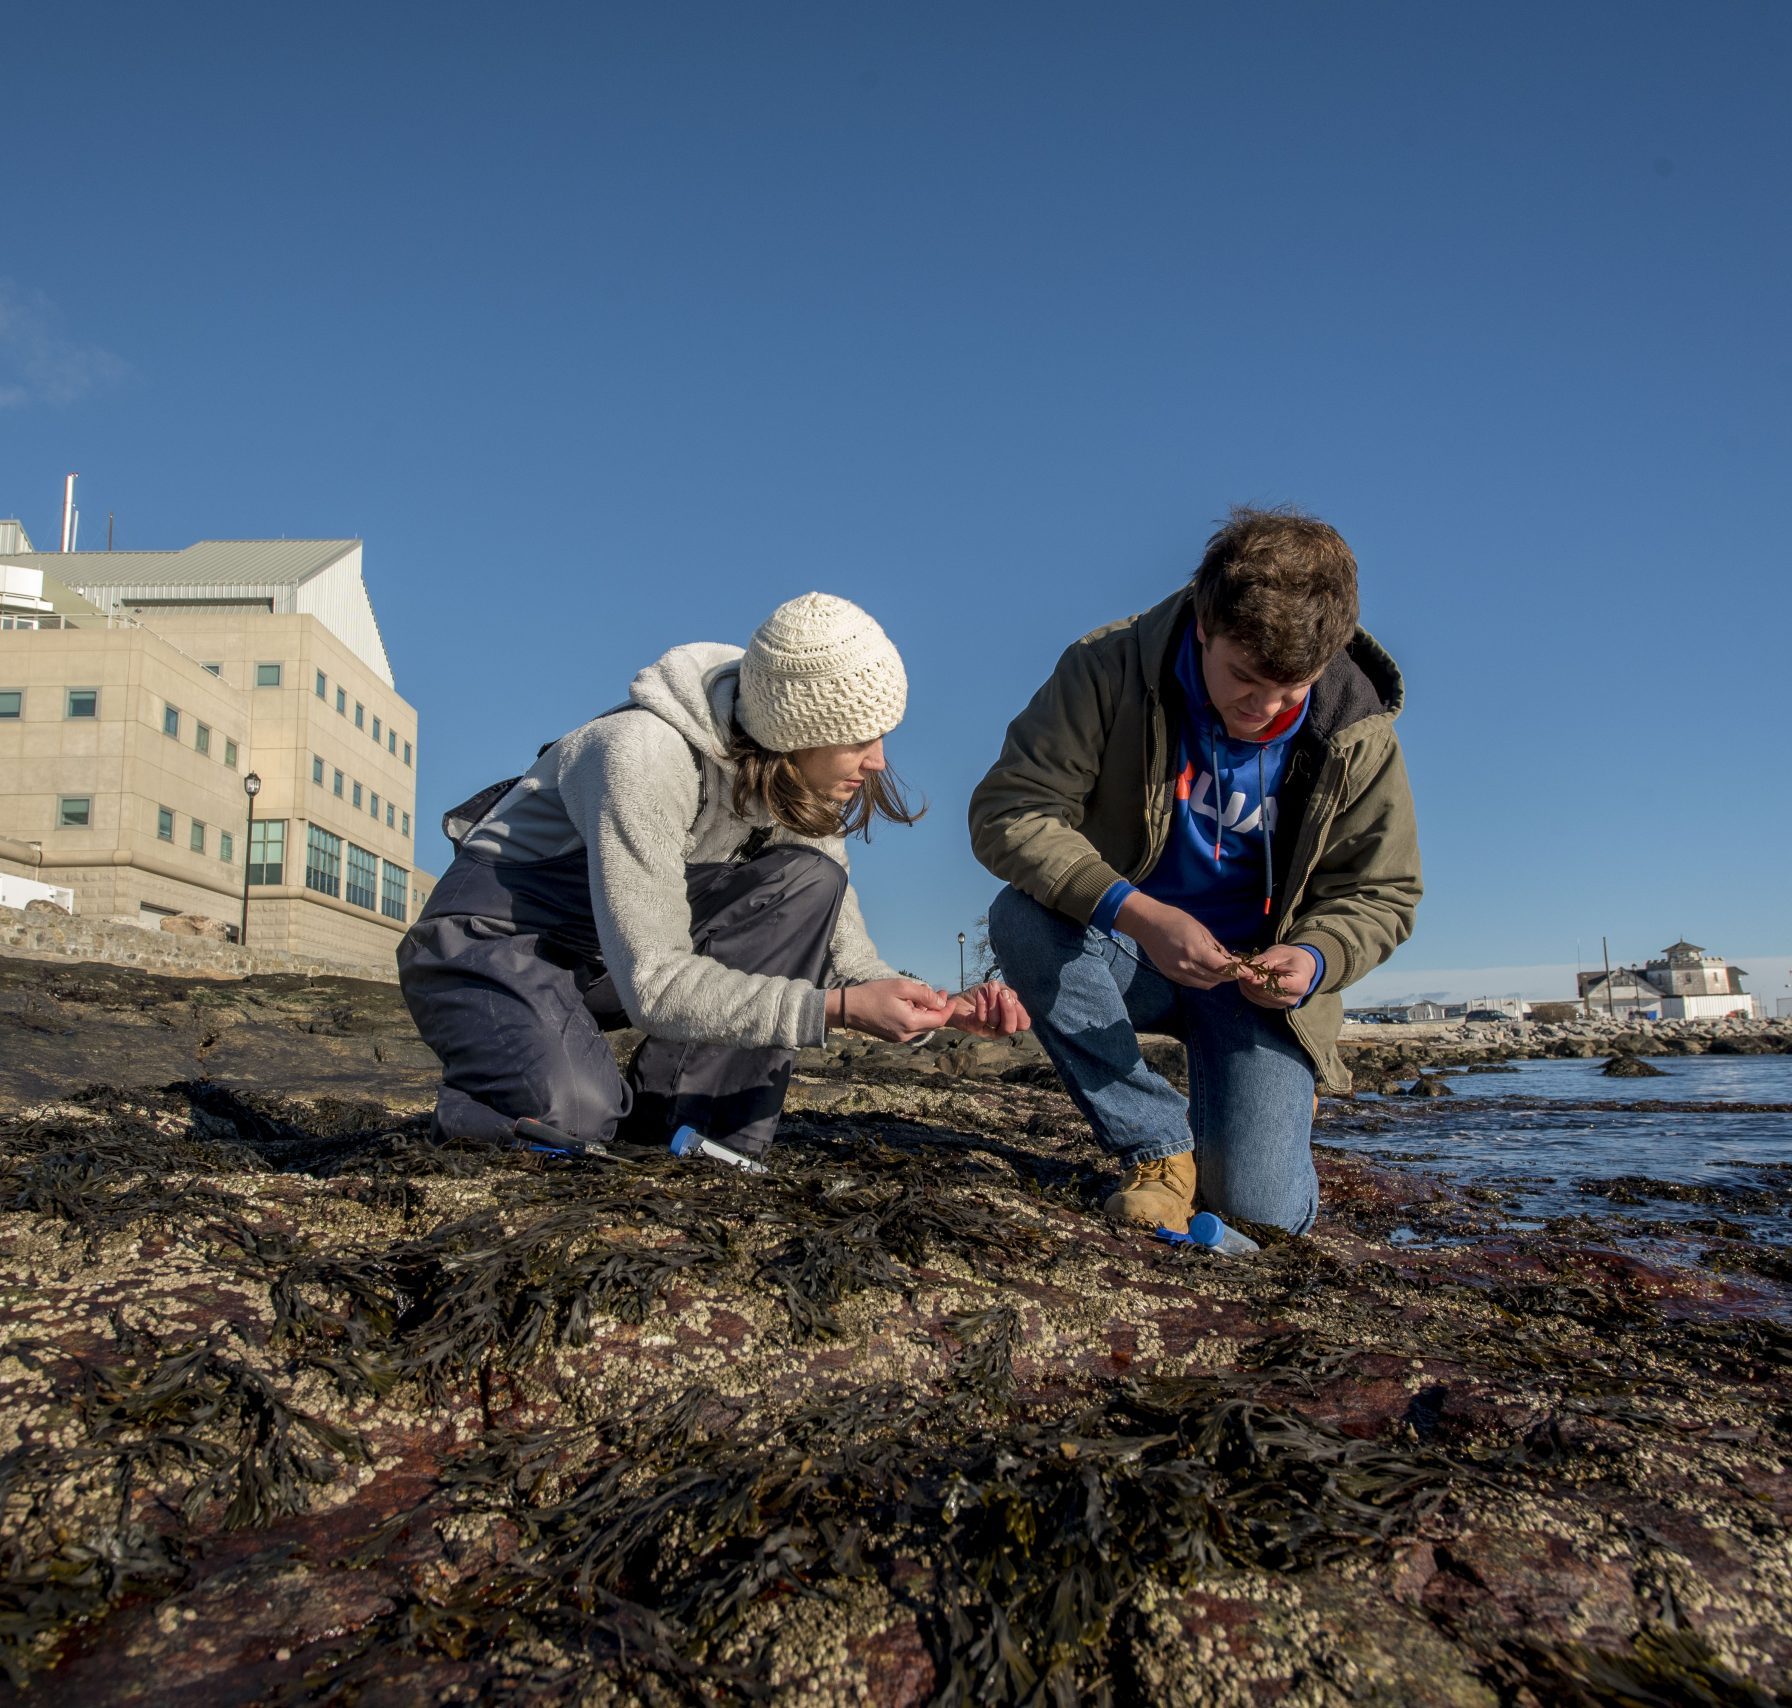 Chris Mills ’18 Marine Science, and Assistant Professor Catherine Matassa working on a research project at UConn Avery Point on Nov. 29, 2018. (Sean Flynn/UConn Photo)